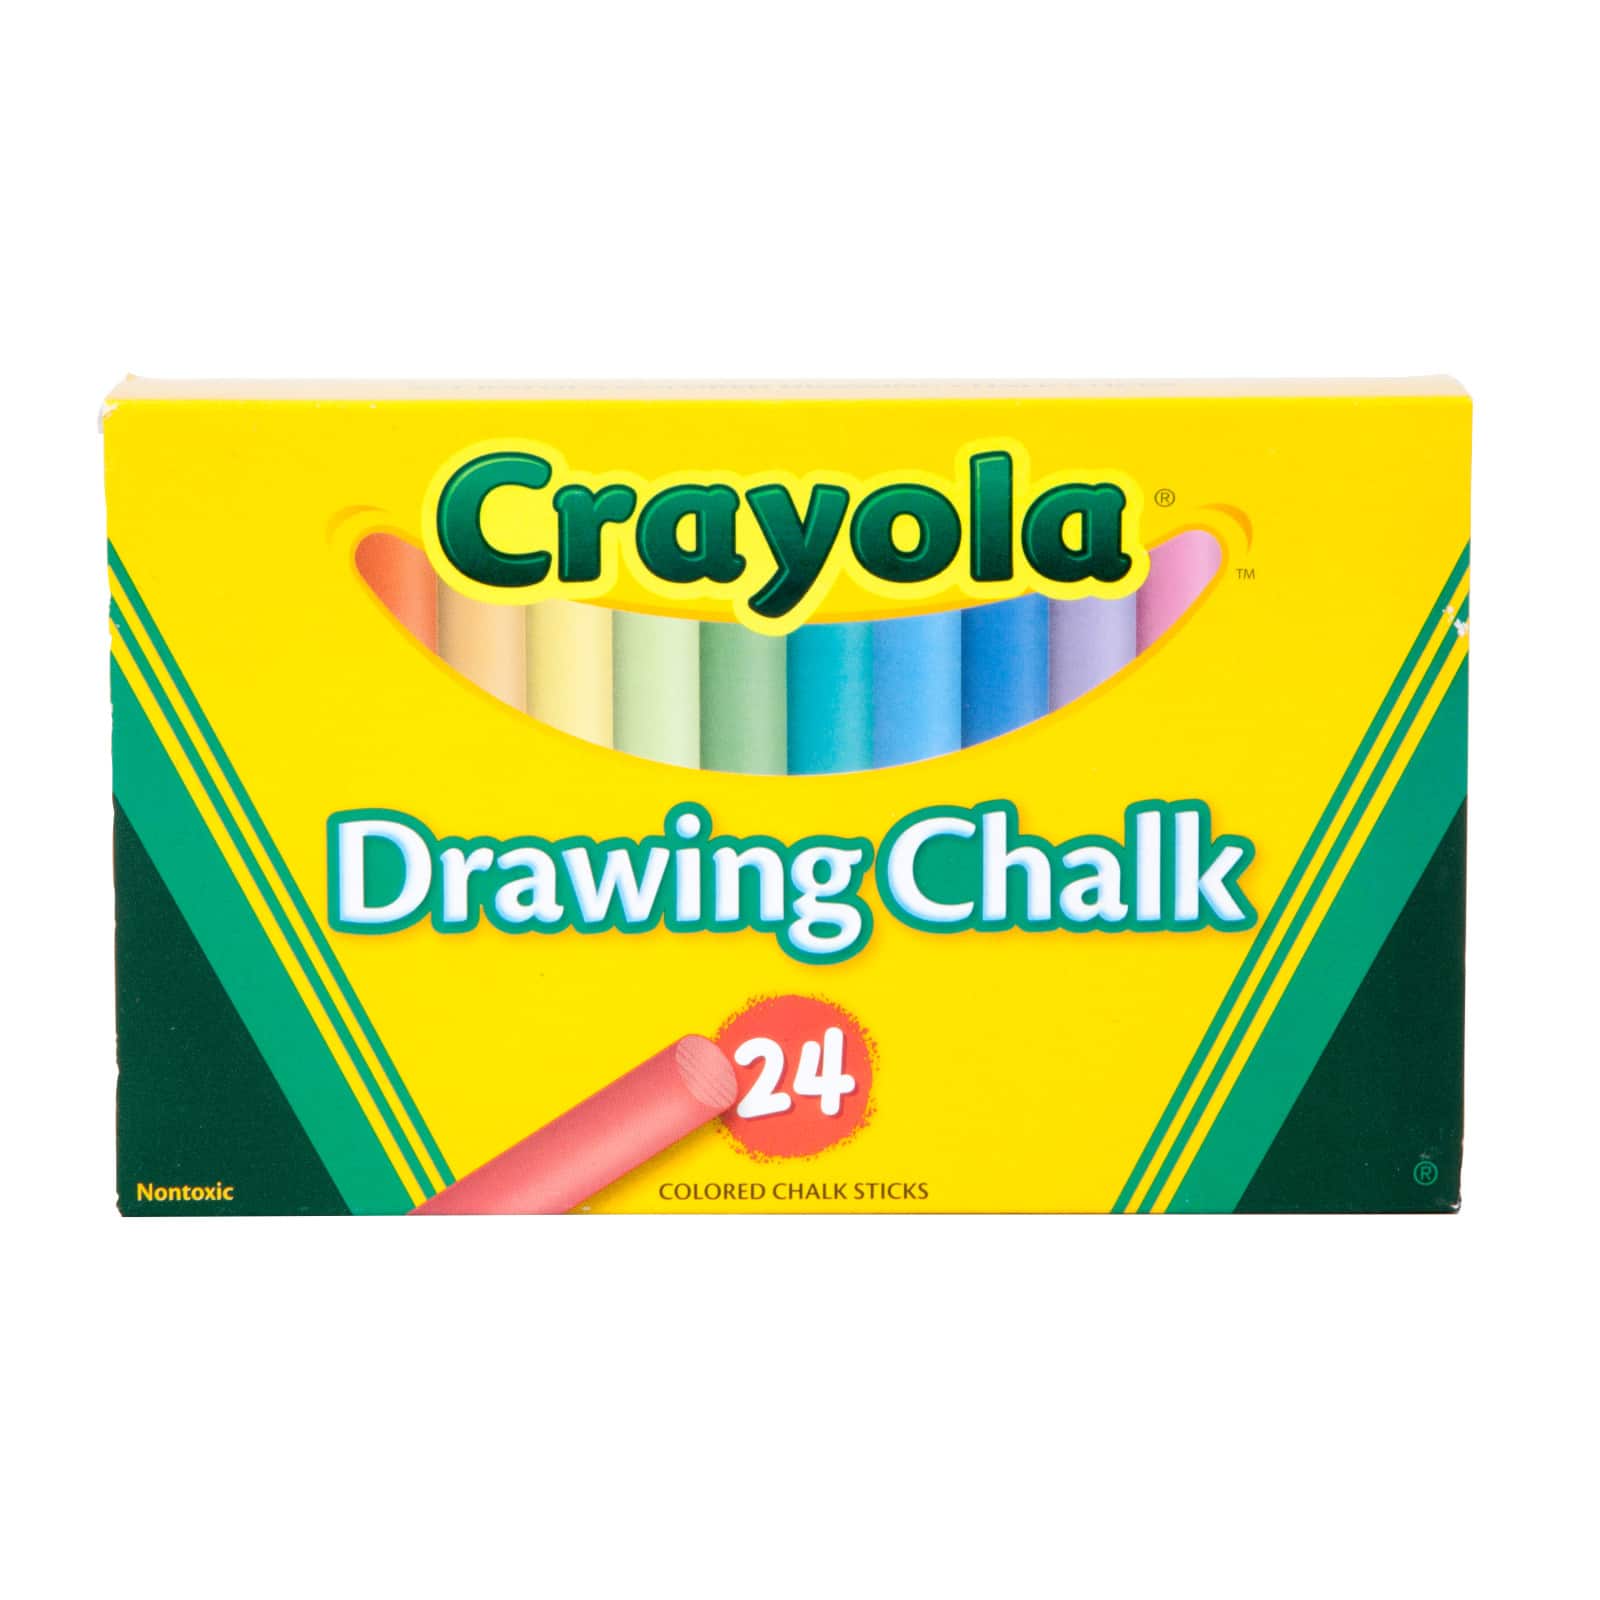 Brand New. 24 Sticks 2 Pack New, Nontoxic Colored Chalk 